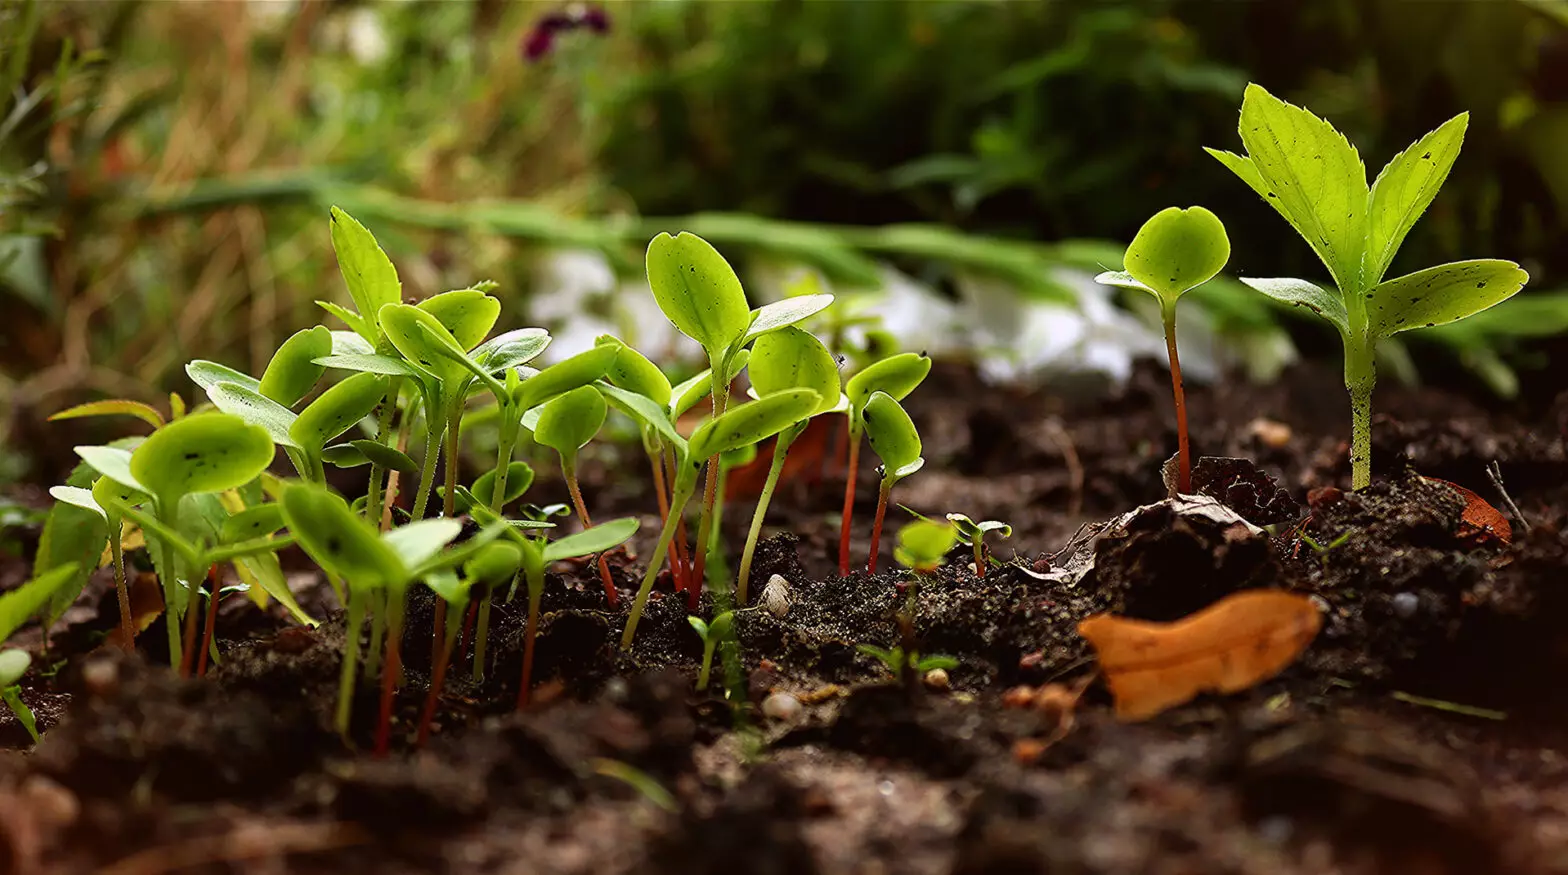 How do Plants Absorb Nutrients like these seedlings sprouting out of soil in a garden